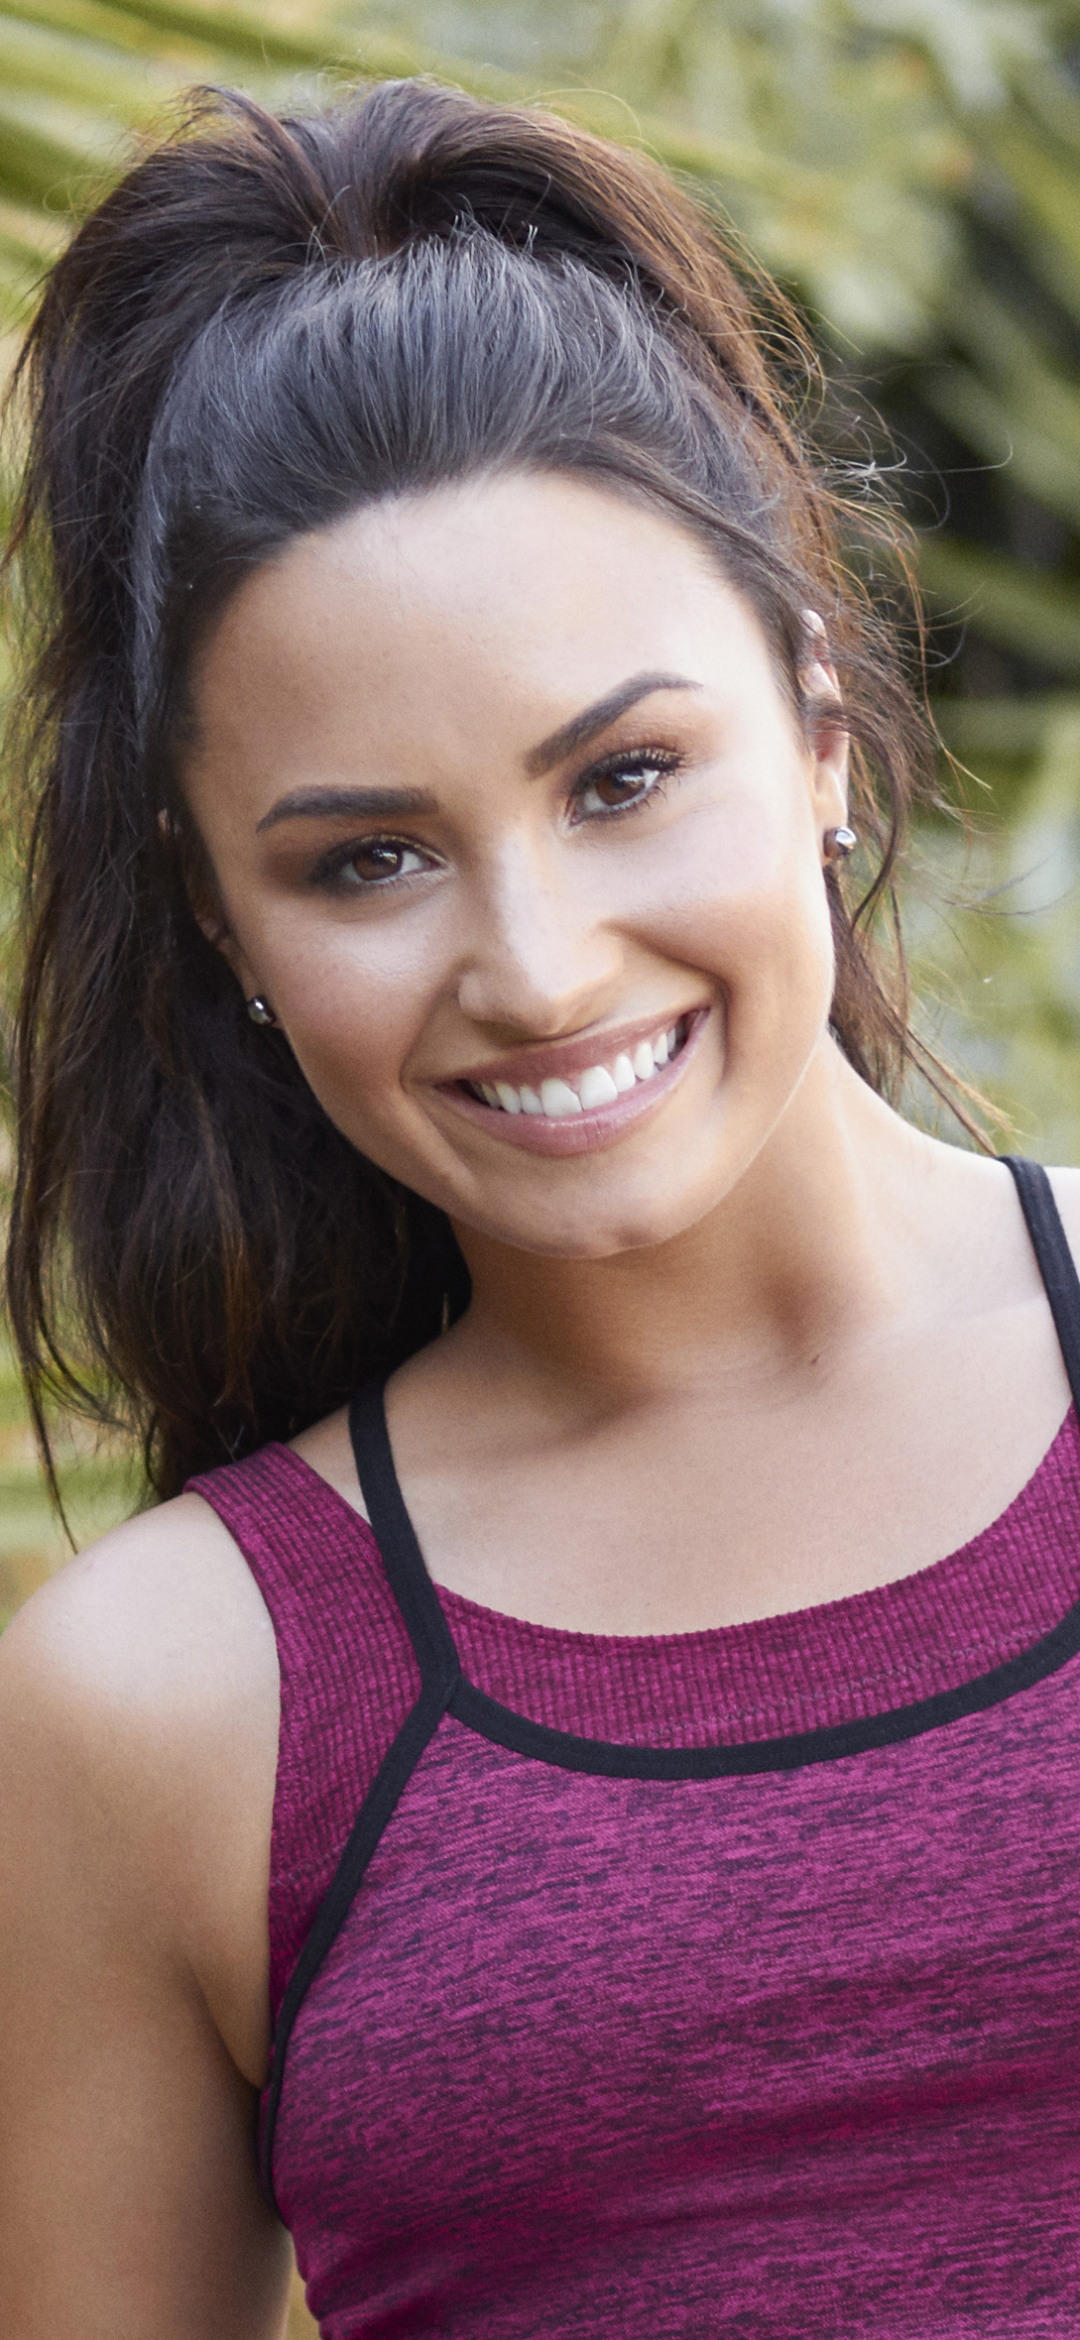 Demi Lovato Iphone Wallpapers